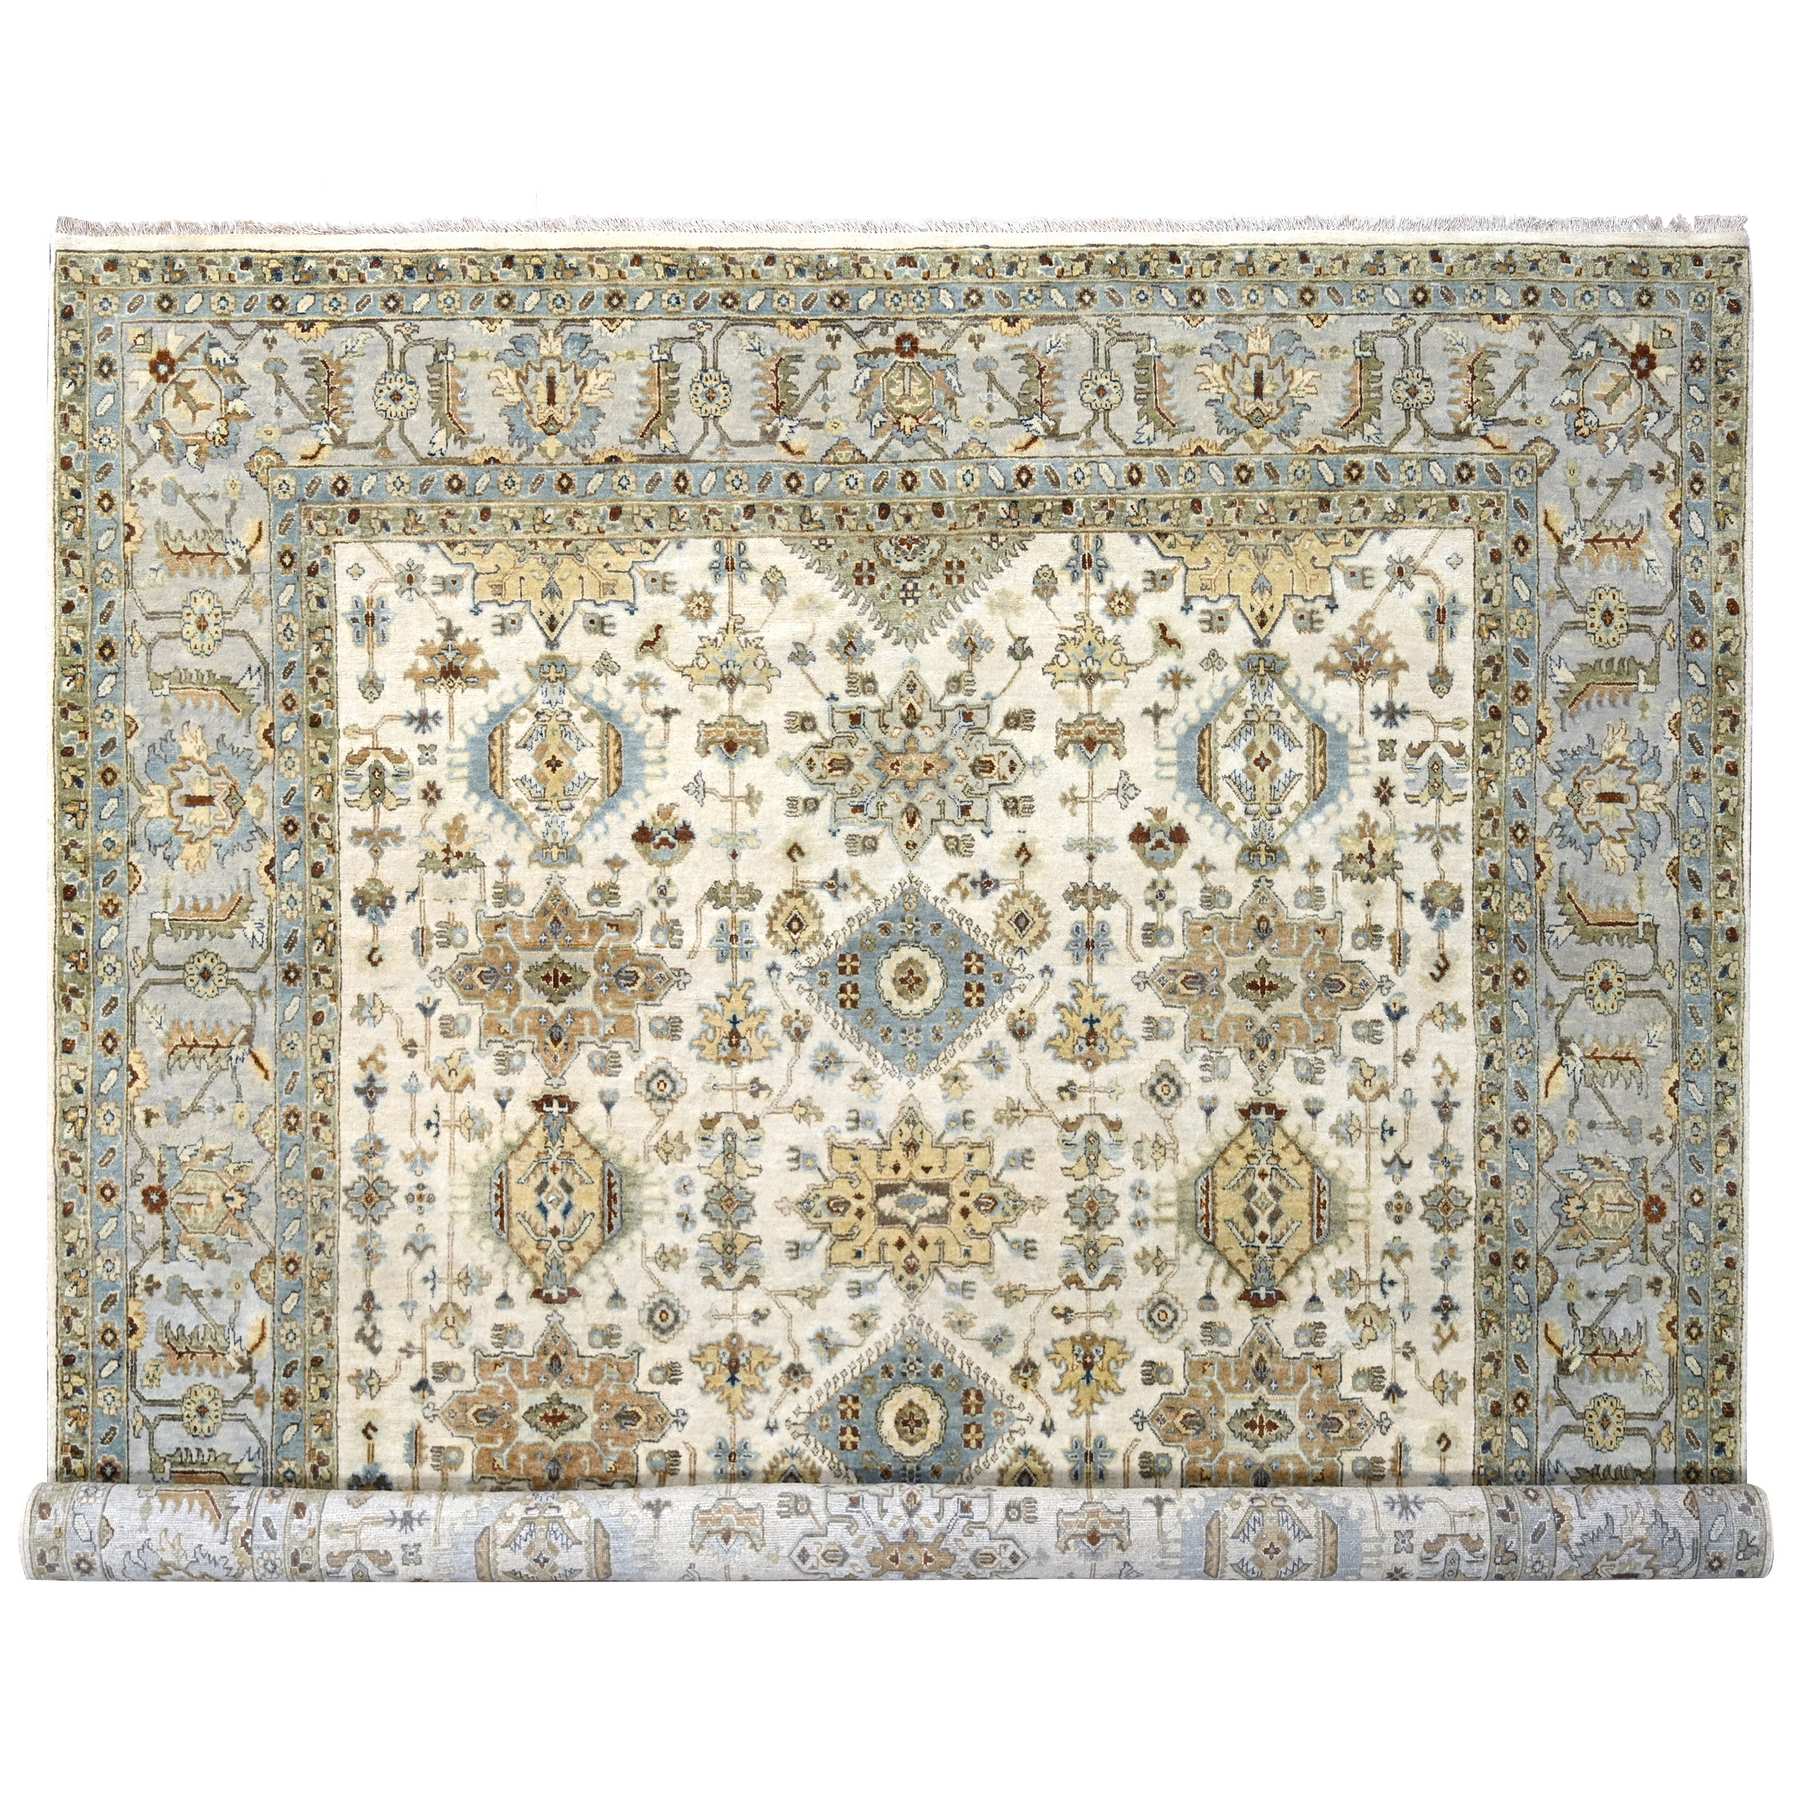  Wool Hand-Knotted Area Rug 9'9